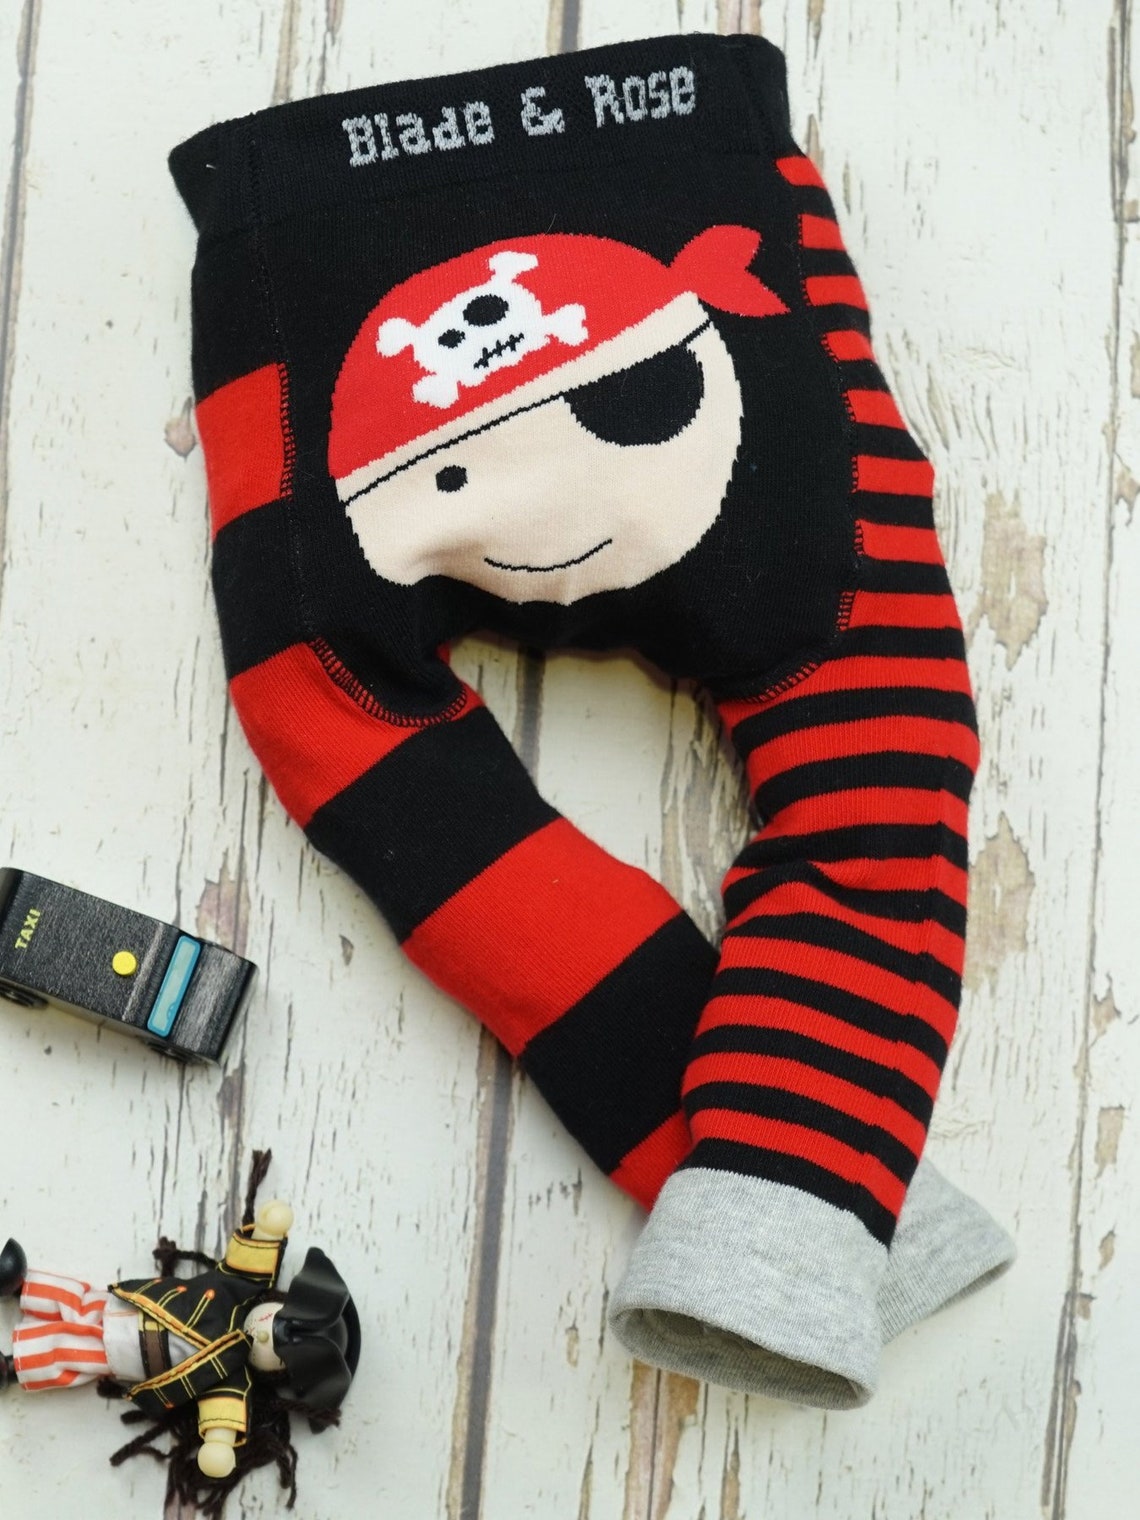 Image shows cute pirate leggings with Pirate design on the bum.